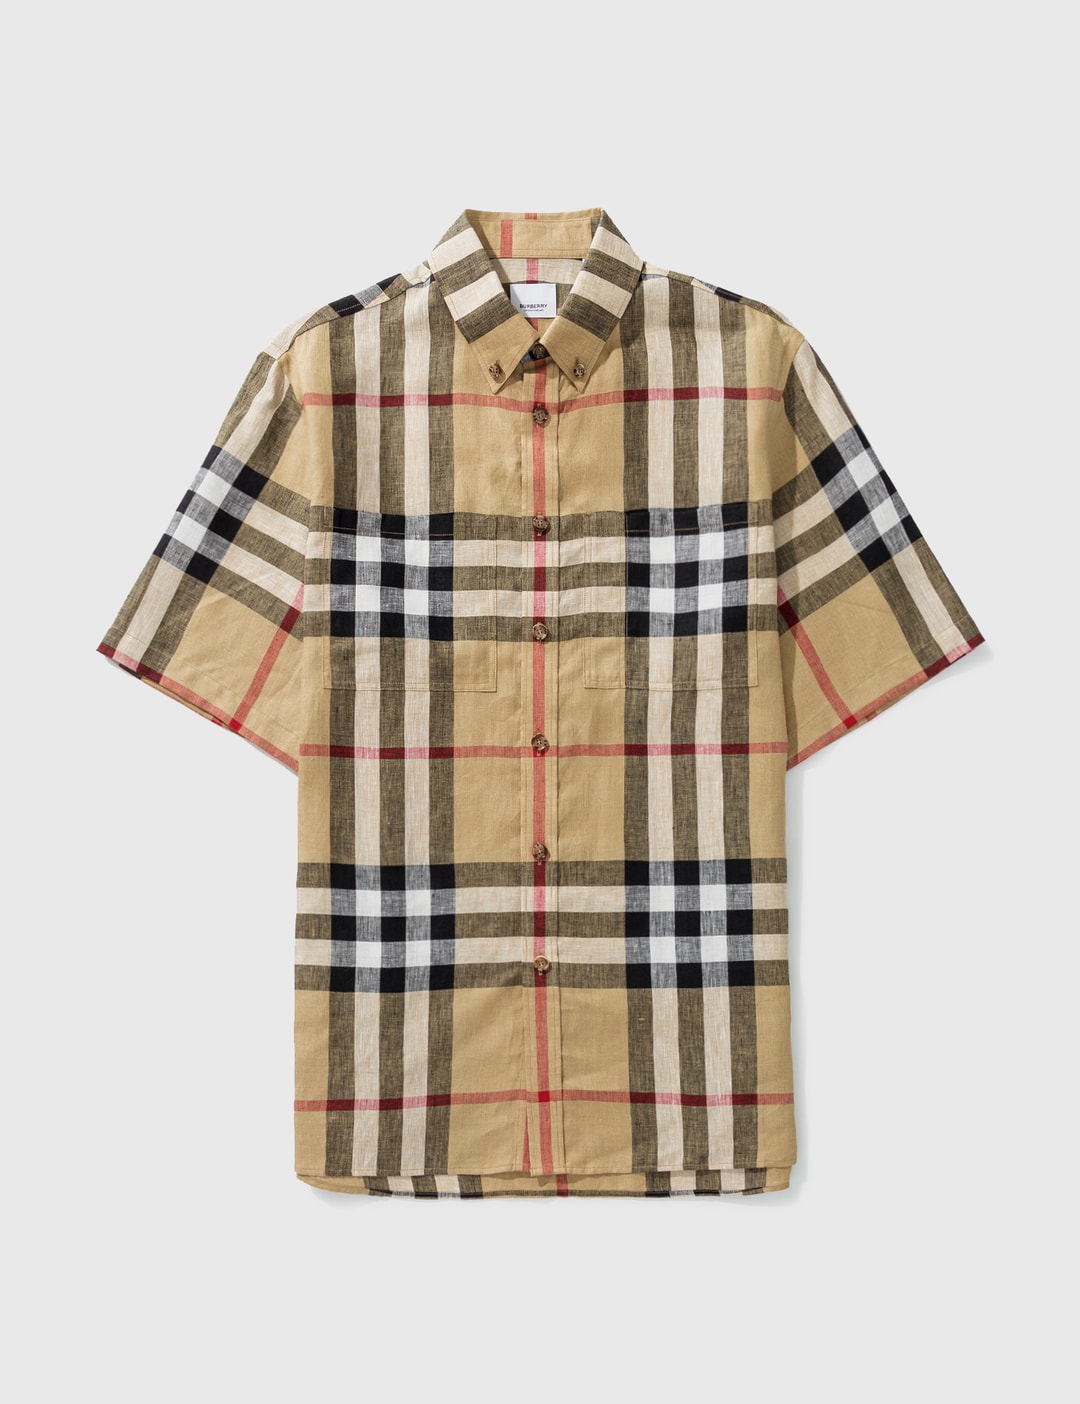 Need help! Is this Burberry shirt fake!